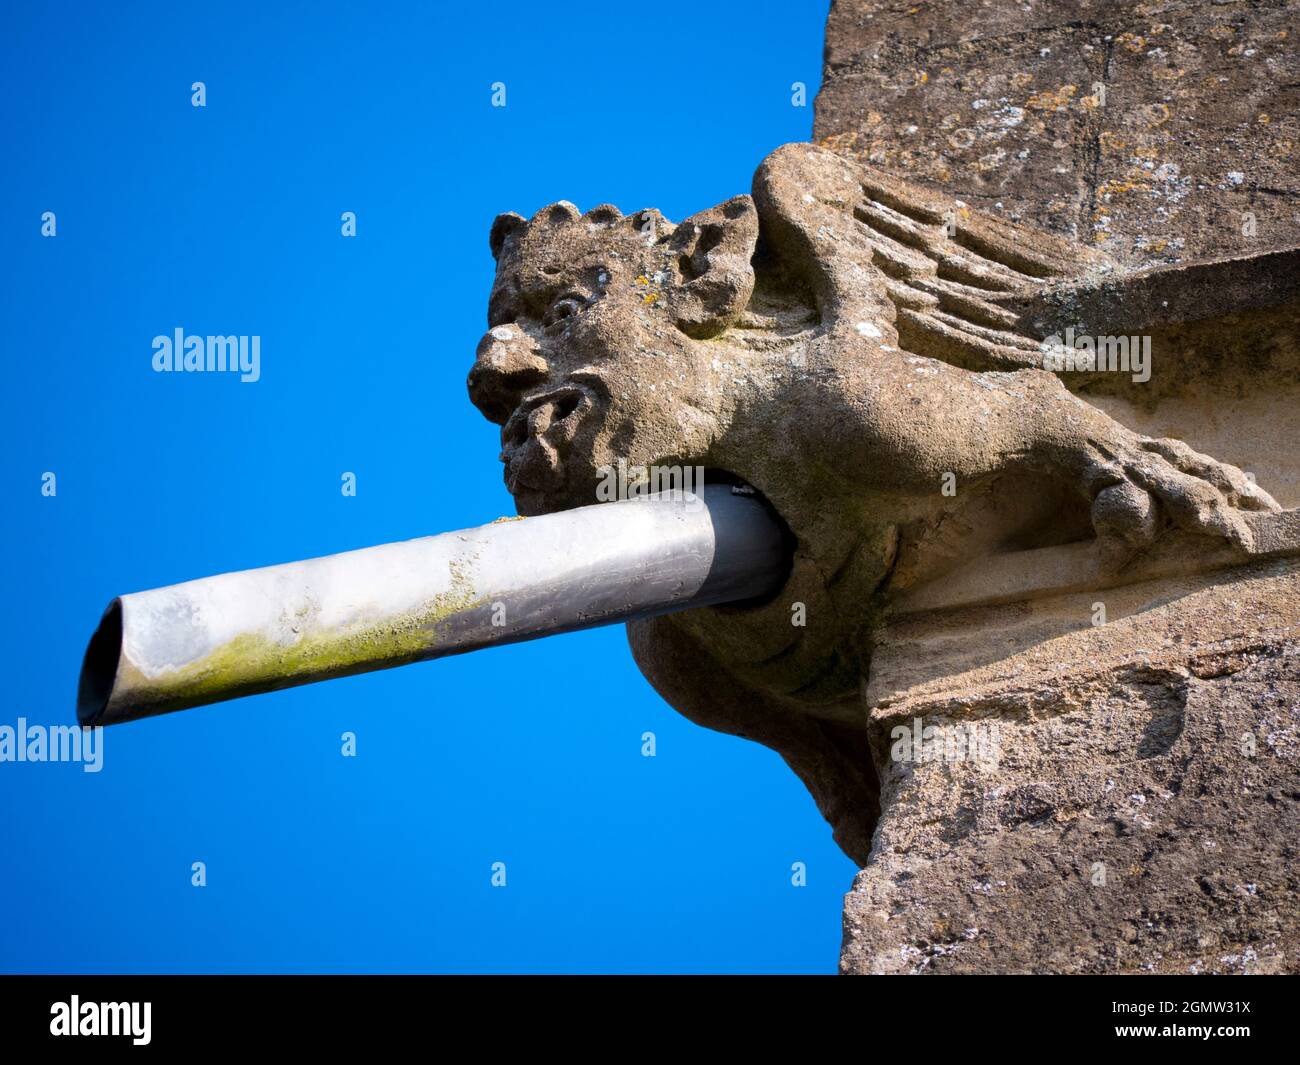 Radley, Oxfordshire, England - 11 April 2021;  no people in view.   A quirky, dual-purpose drainpipe gargoyle stuck on top of the walls of my local pa Stock Photo